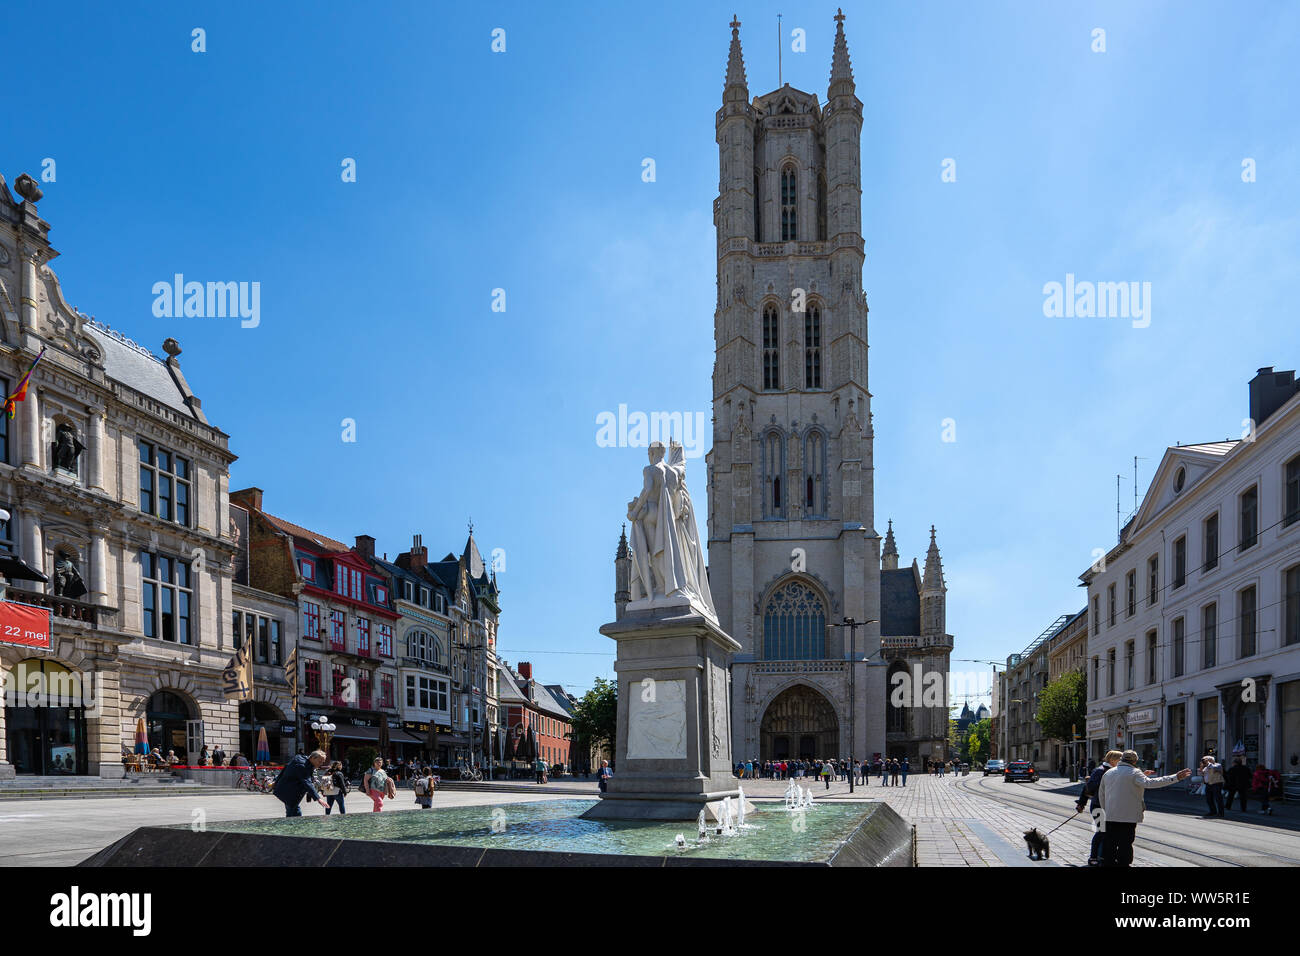 Ghent, Belgium - May 16, 2019: Saint Bravo Cathedral and Ghent town square in Ghent, Belgium. Stock Photo